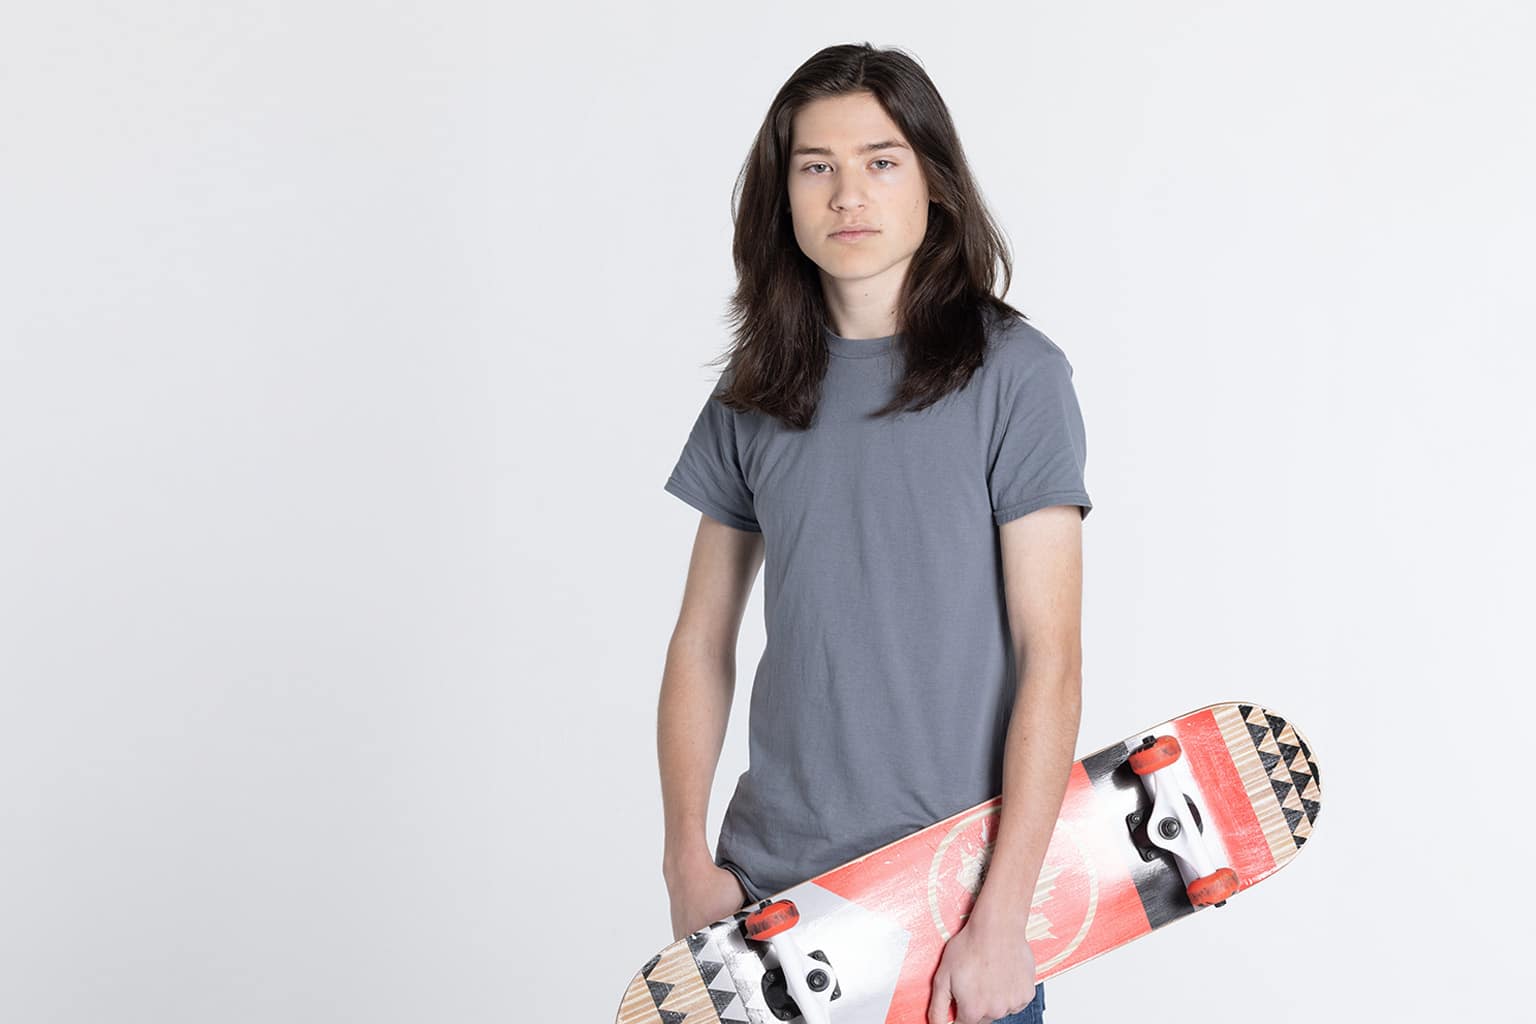 Teen male looking at the camera and holding a skateboard